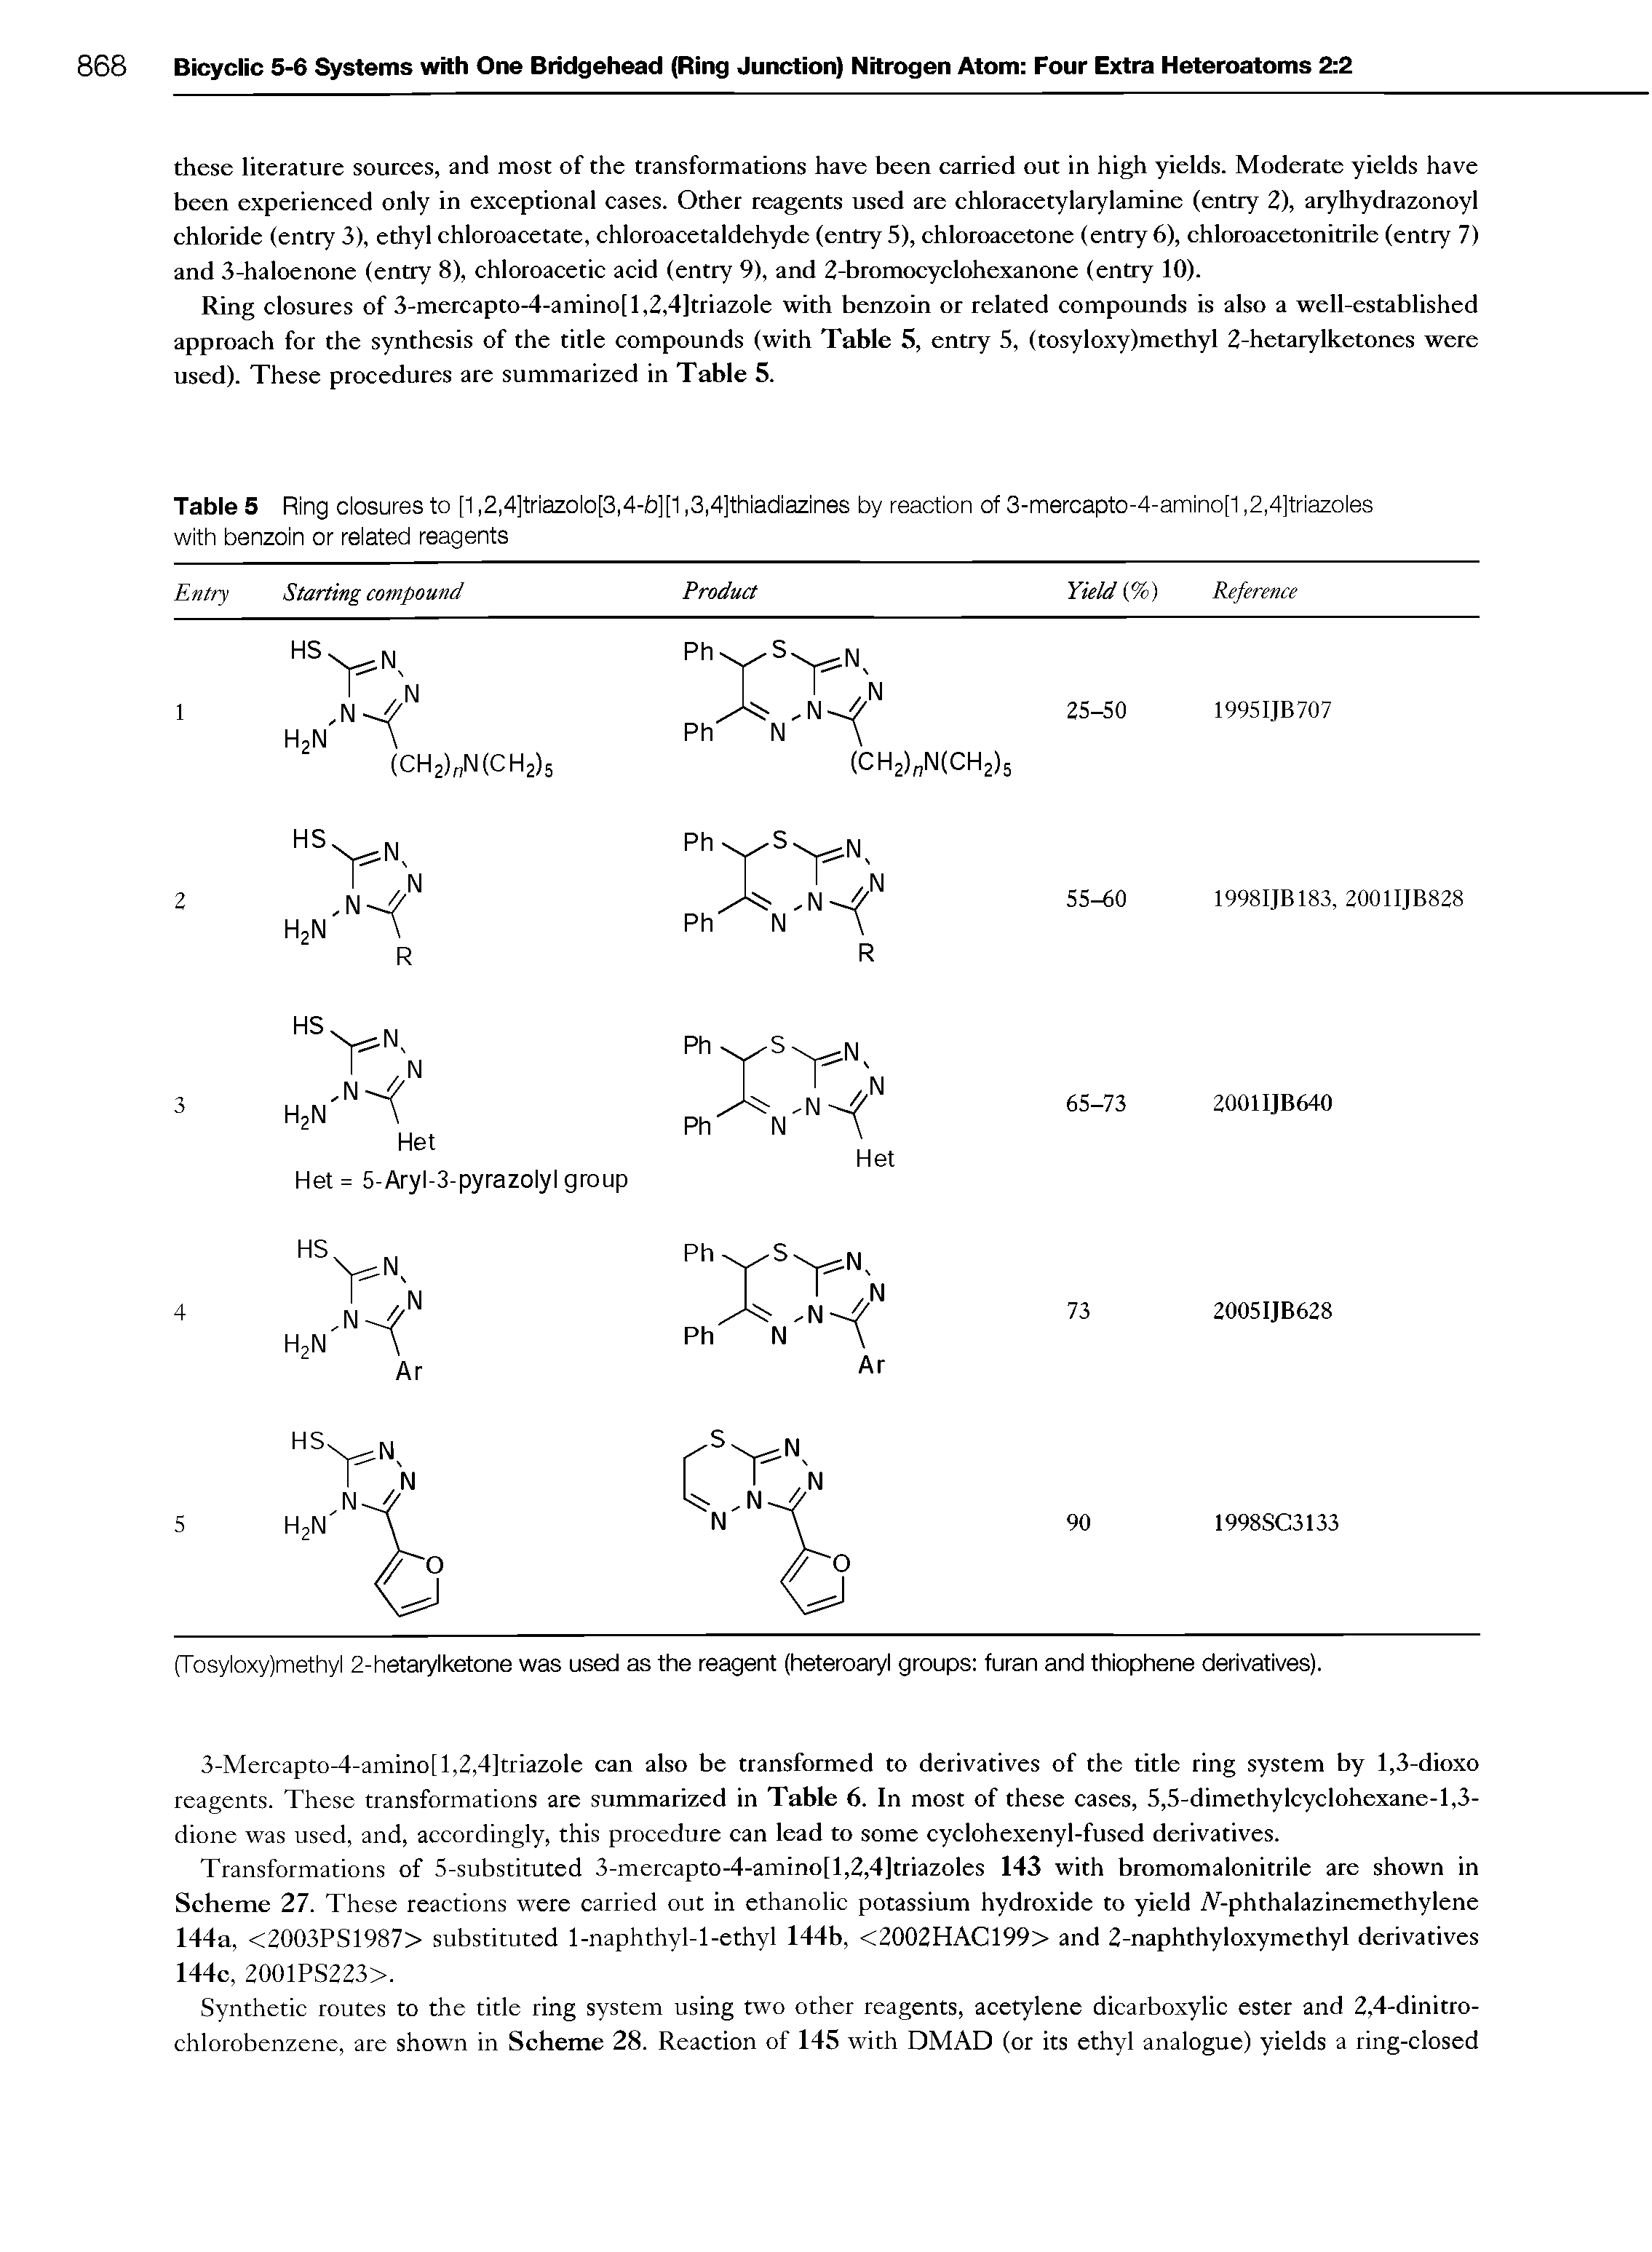 Table 5 Ring closures to [1,2,4]triazolo[3,4-b][1,3,4]thiadiazines by reaction of 3-mercapto-4-amino[1,2,4]triazoles with benzoin or related reagents ...